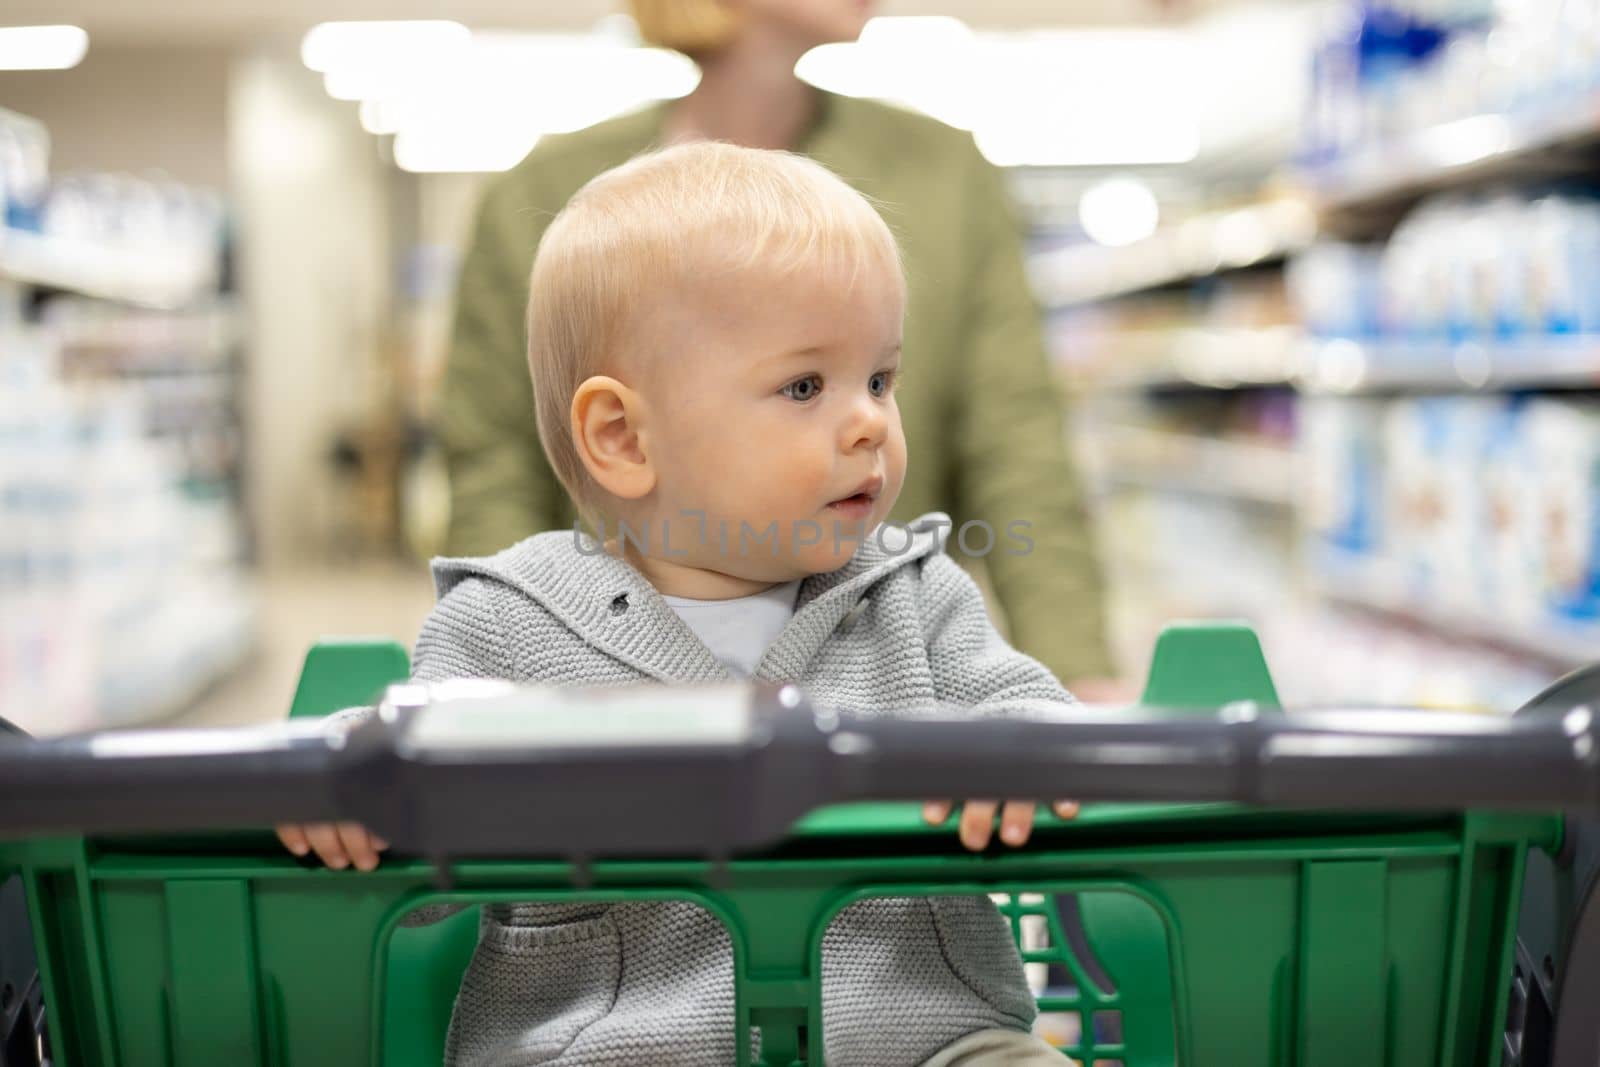 Mother pushing shopping cart with her infant baby boy child down department aisle in supermarket grocery store. Shopping with kids concept